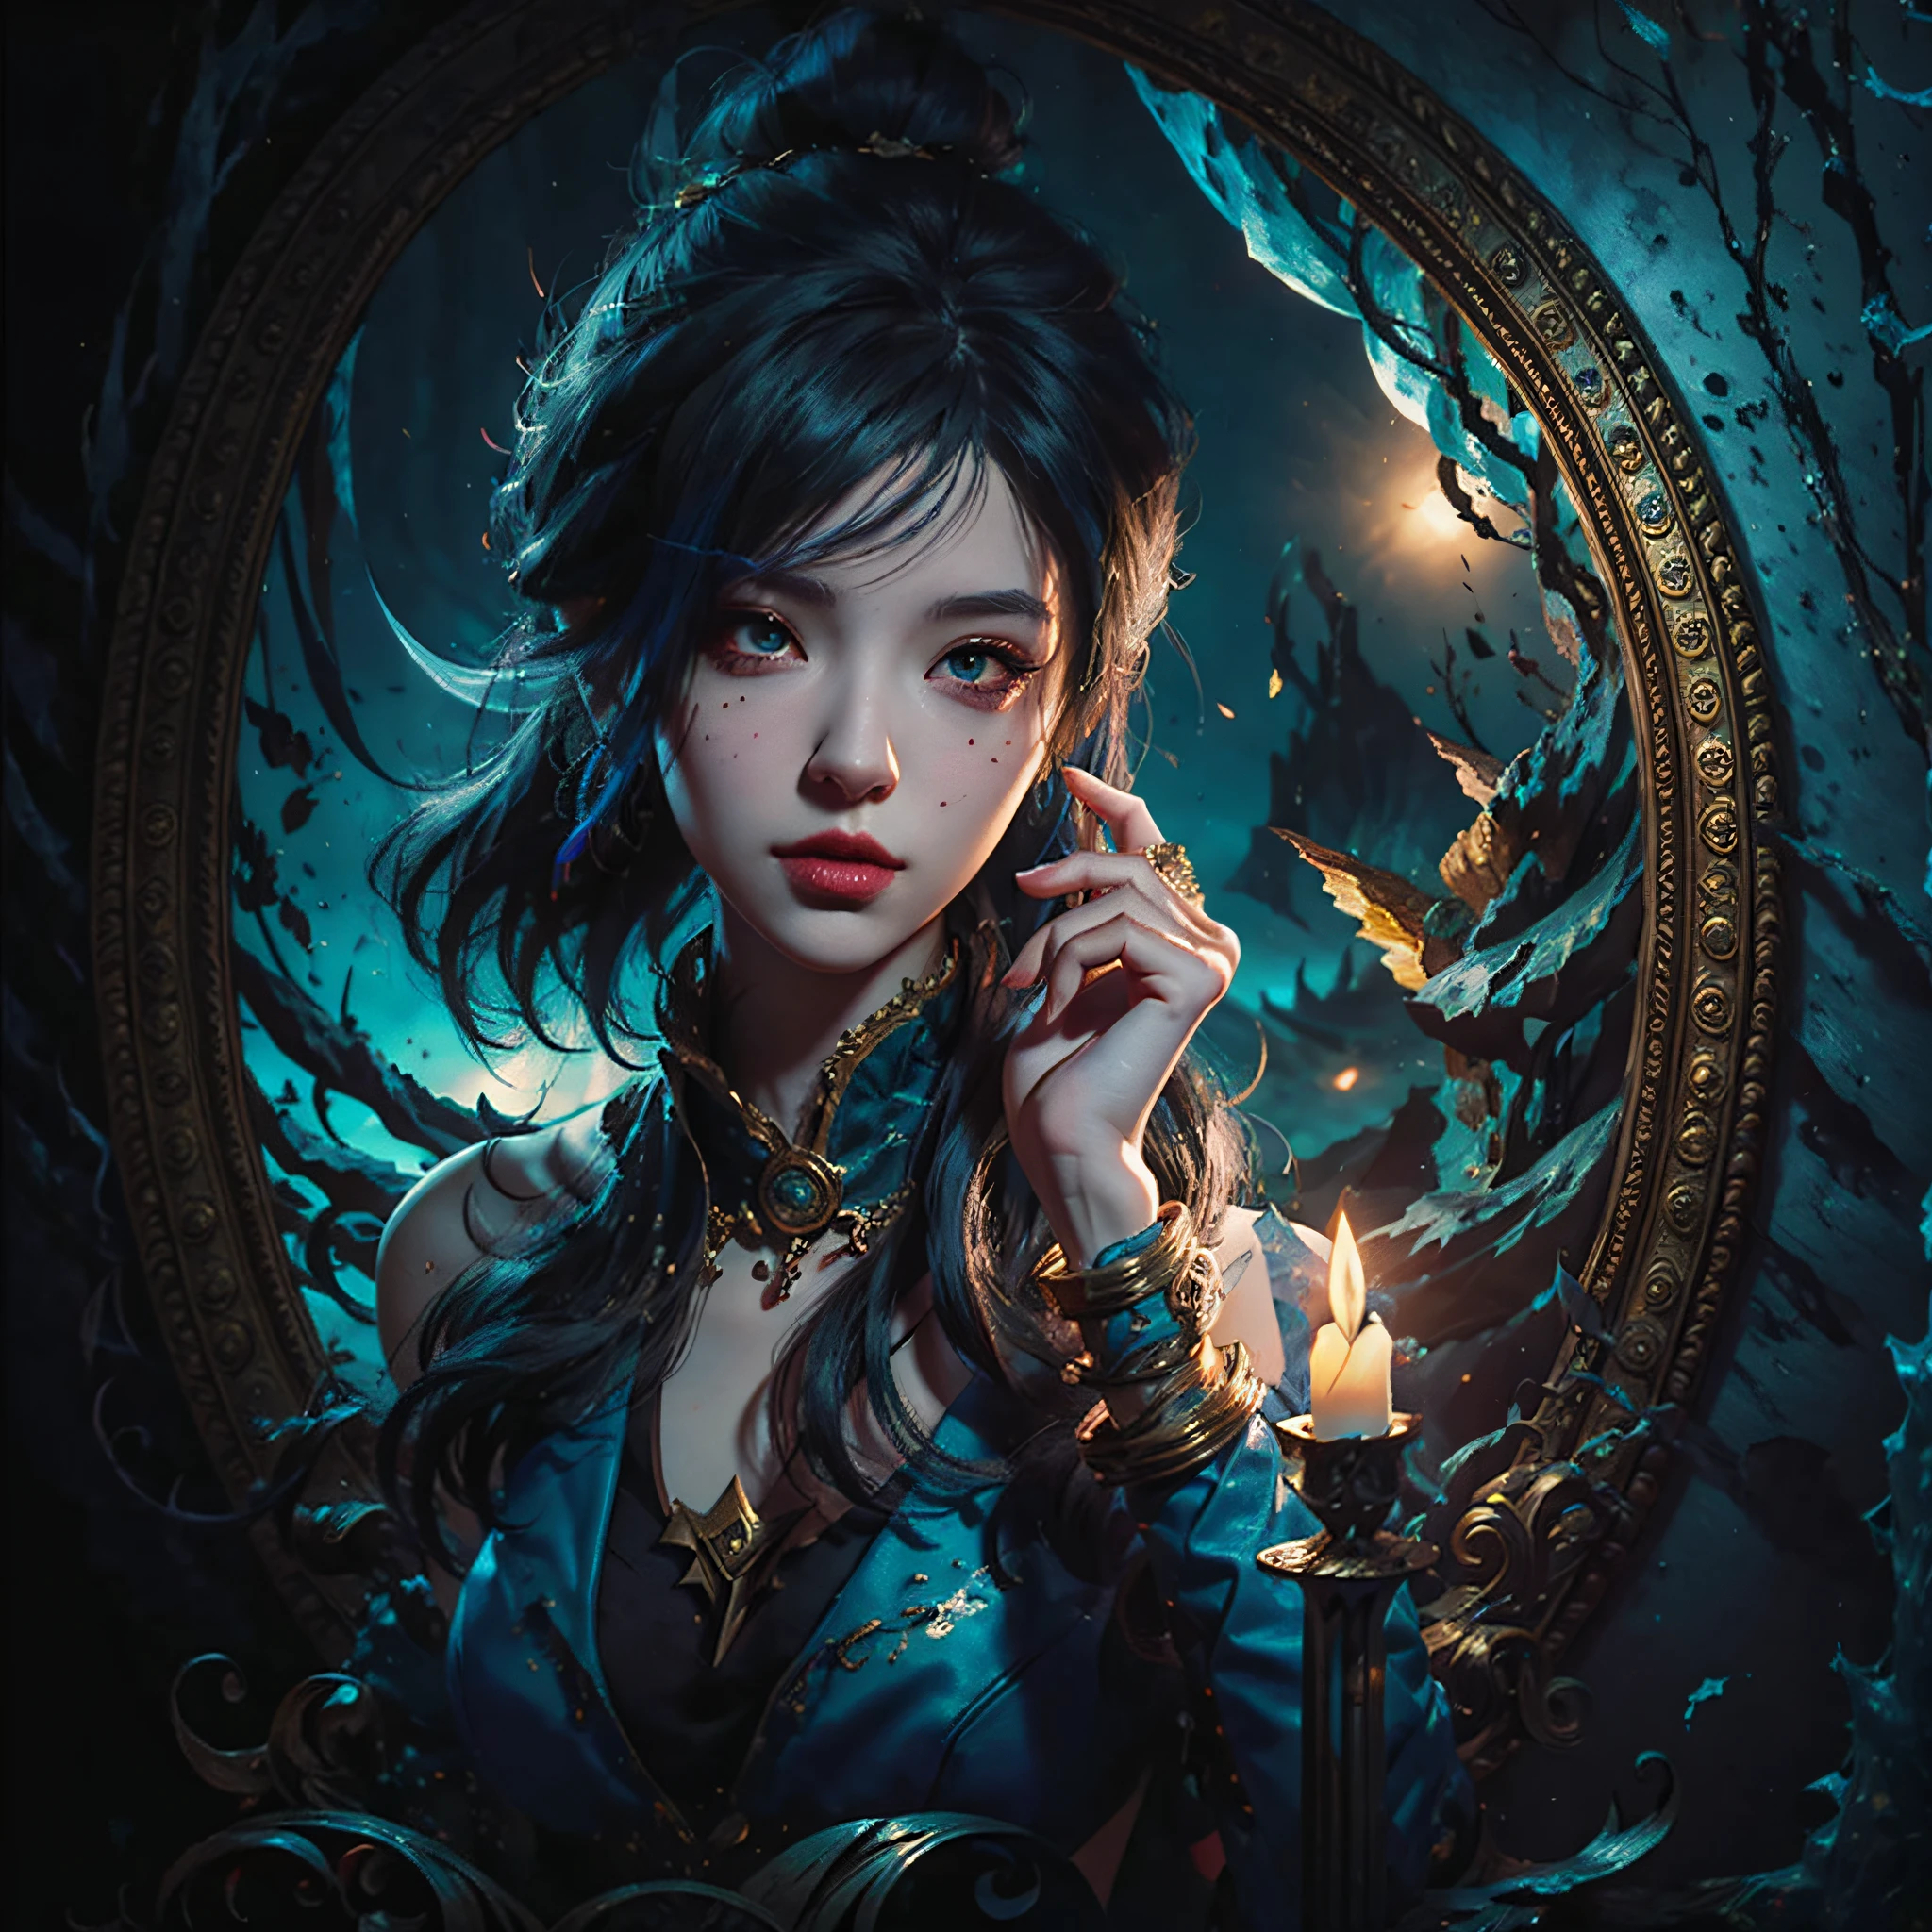 a close up of a person holding a oil lamp, arcane jinx, caitlyn from league of legends, extremely detailed artgerm, samira from league of legends, kda, from league of legends, jinx from league of legends, style artgerm, league of legends character, artgerm detailed, league of legends concept art, ashe